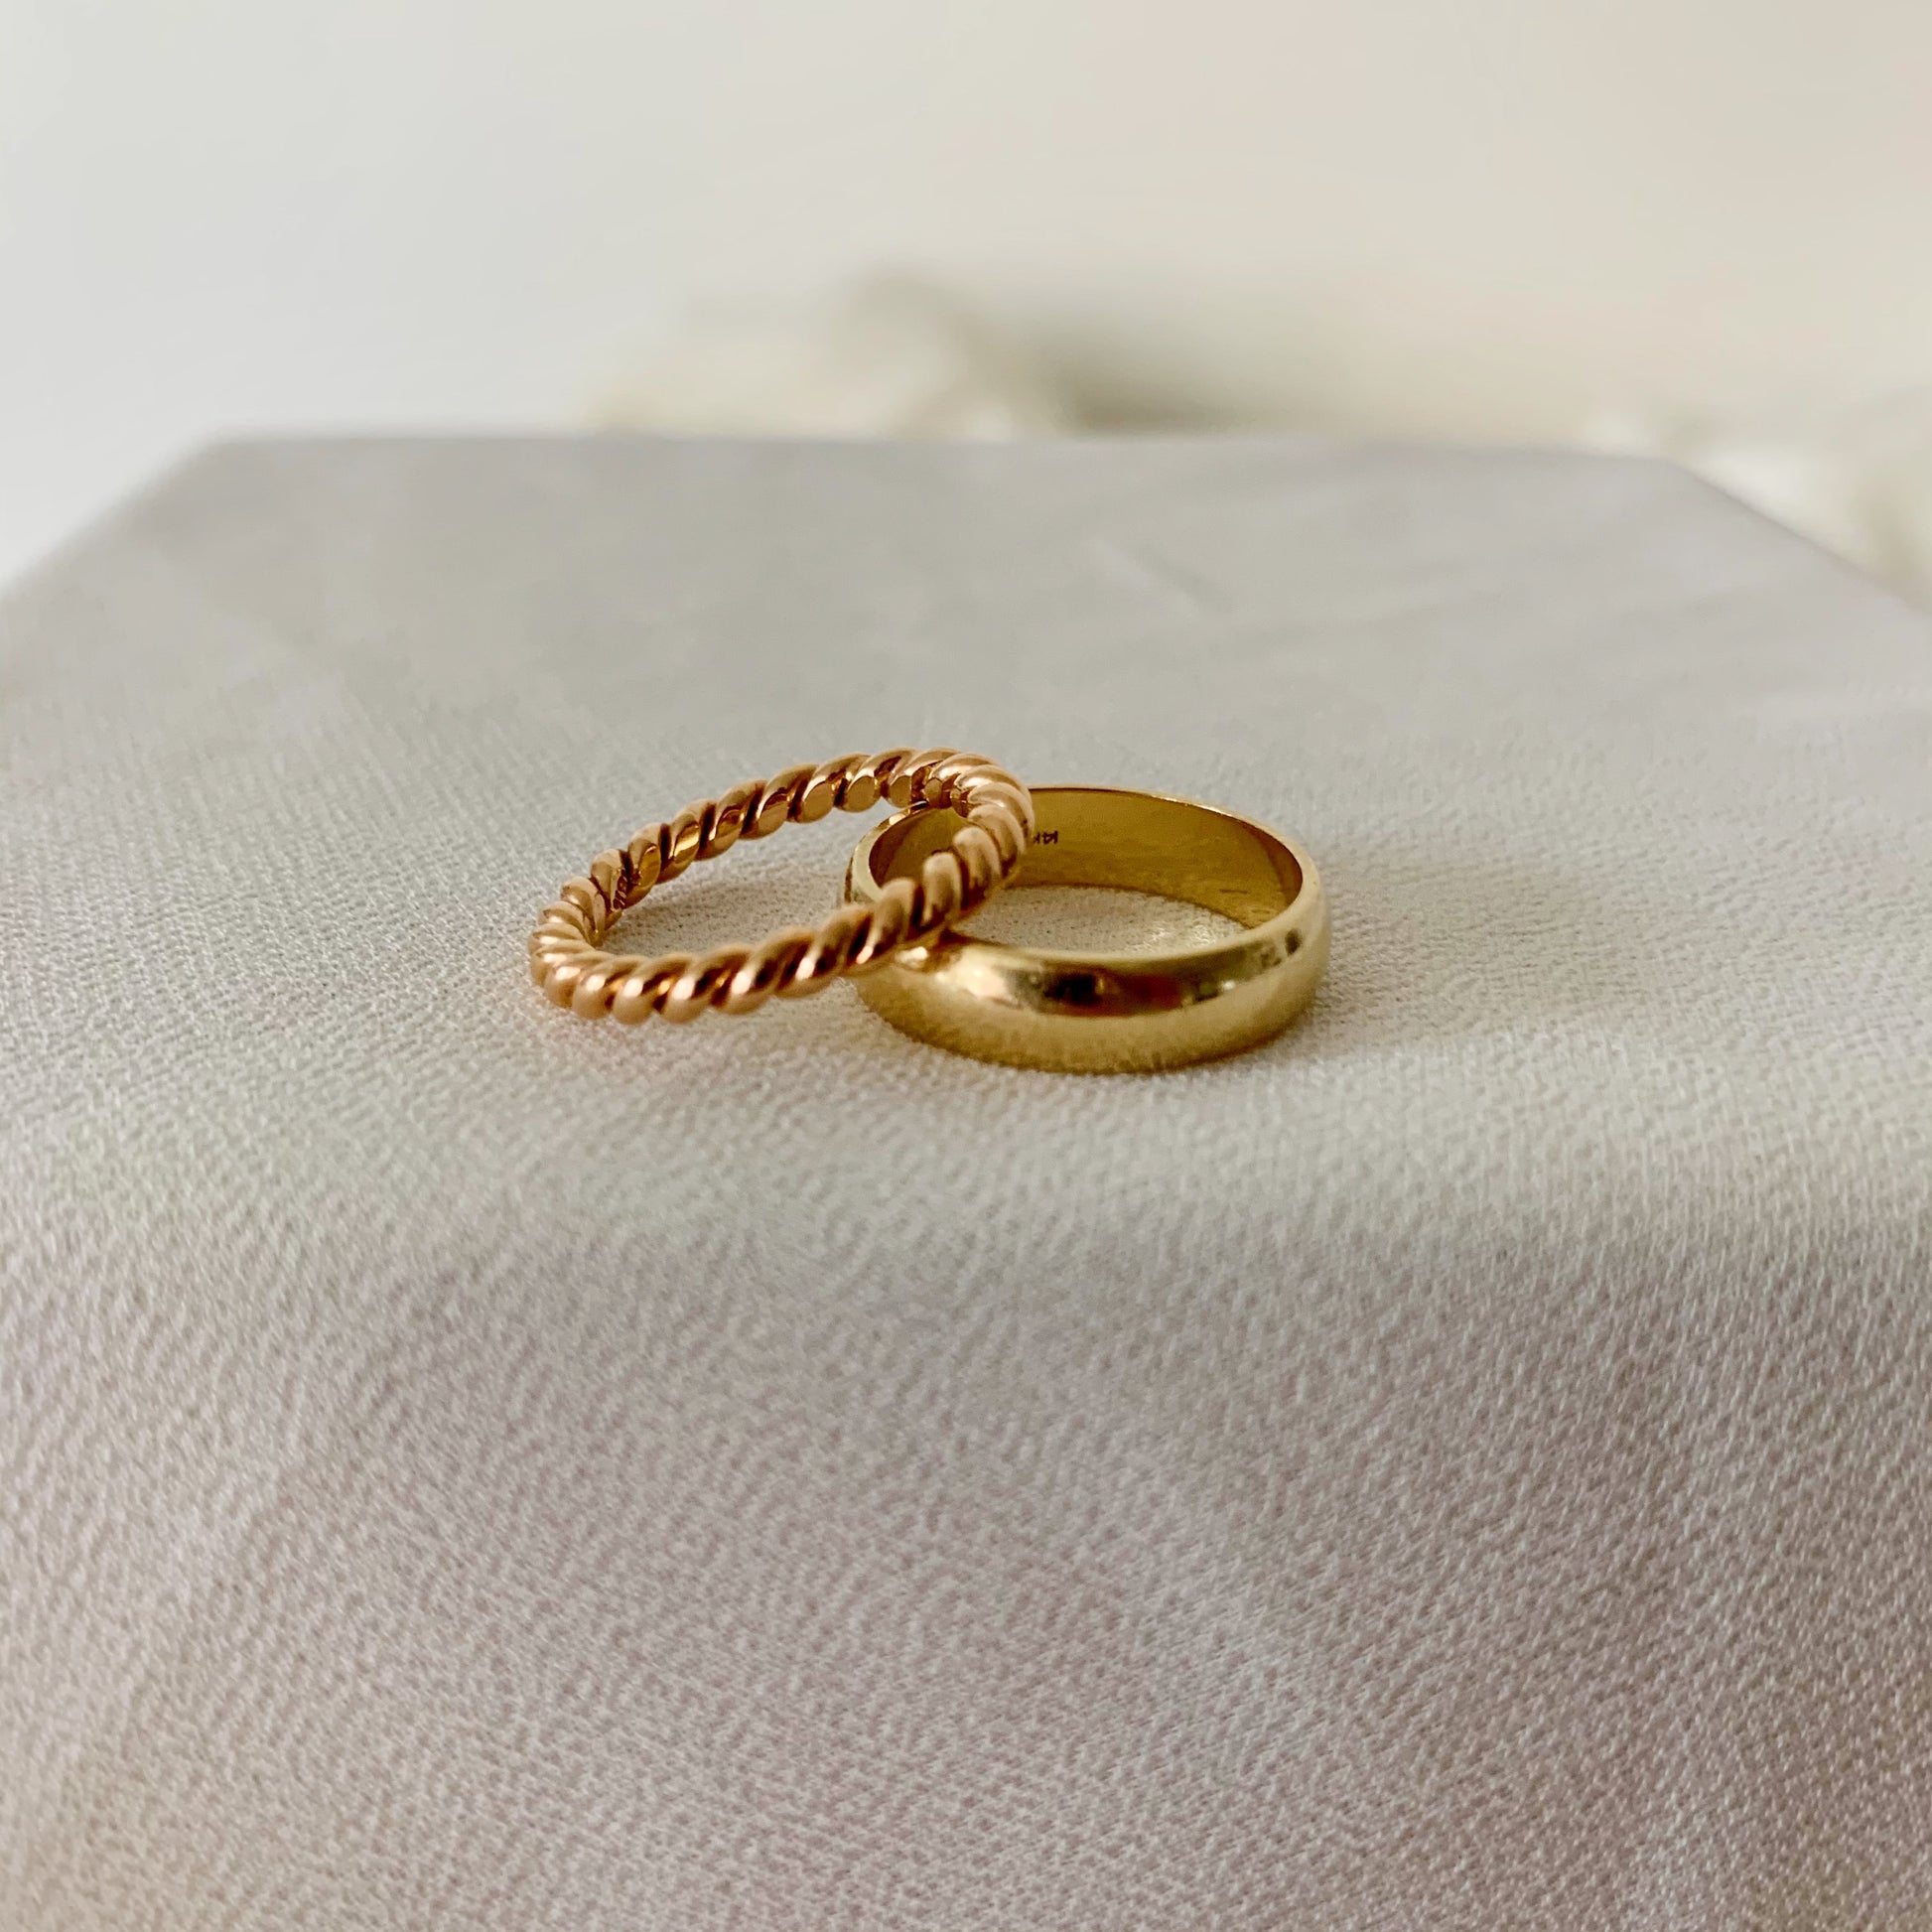 Vintage 18k Rose Gold Twisted Ring Size 5 and Vintage 14k Yellow Gold Thick Band Size 6.25